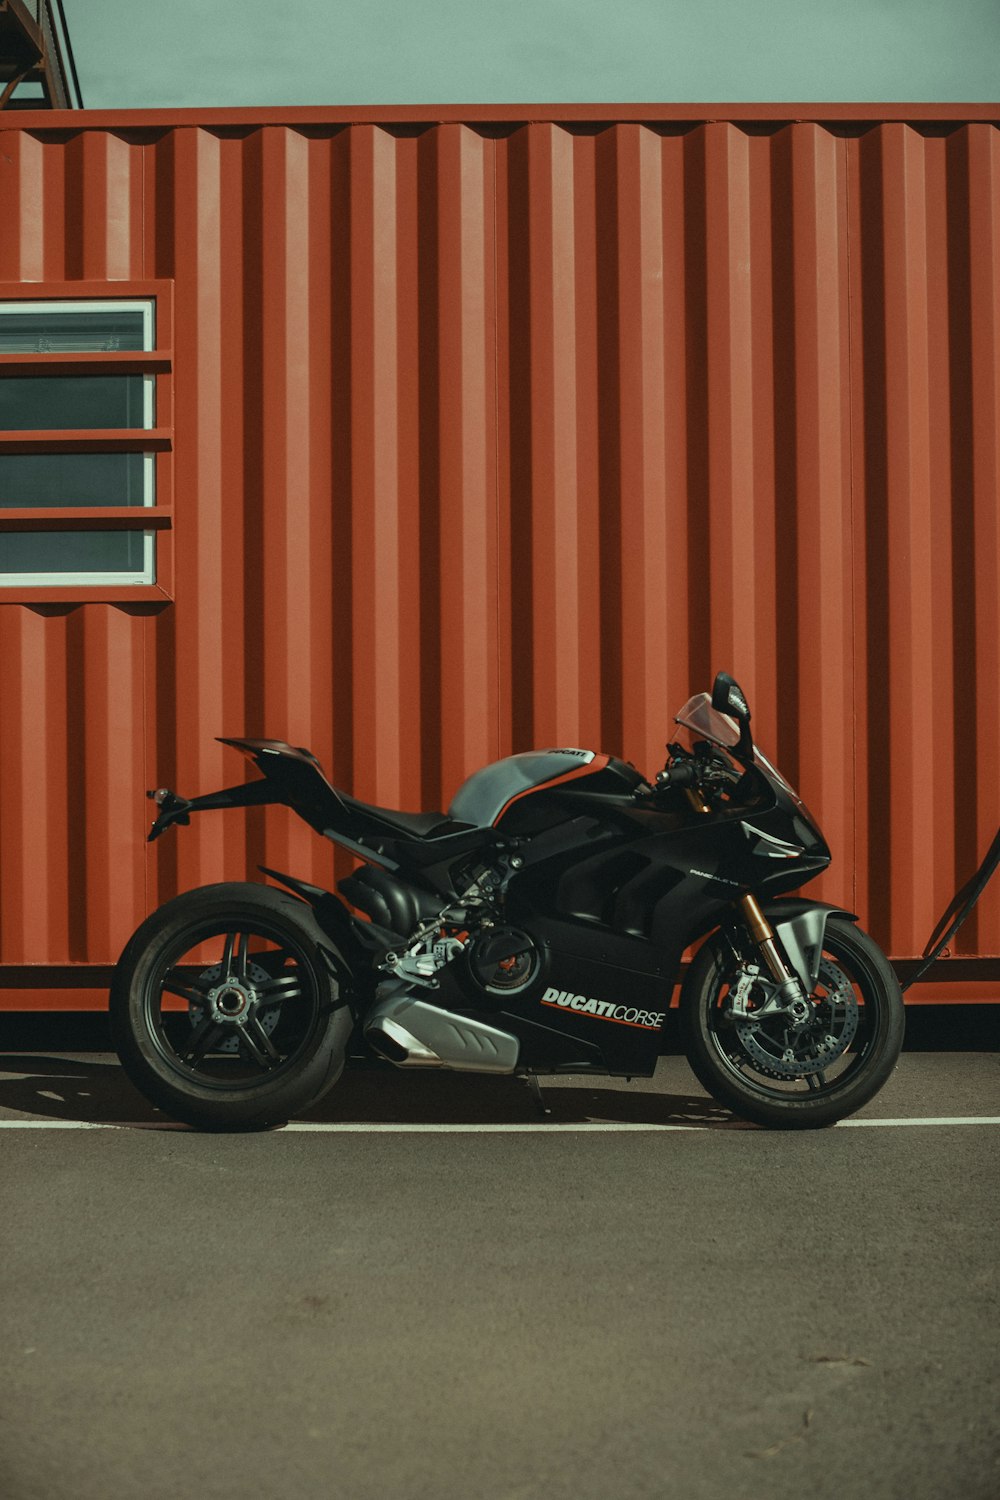 a black motorcycle parked in front of a red shipping container